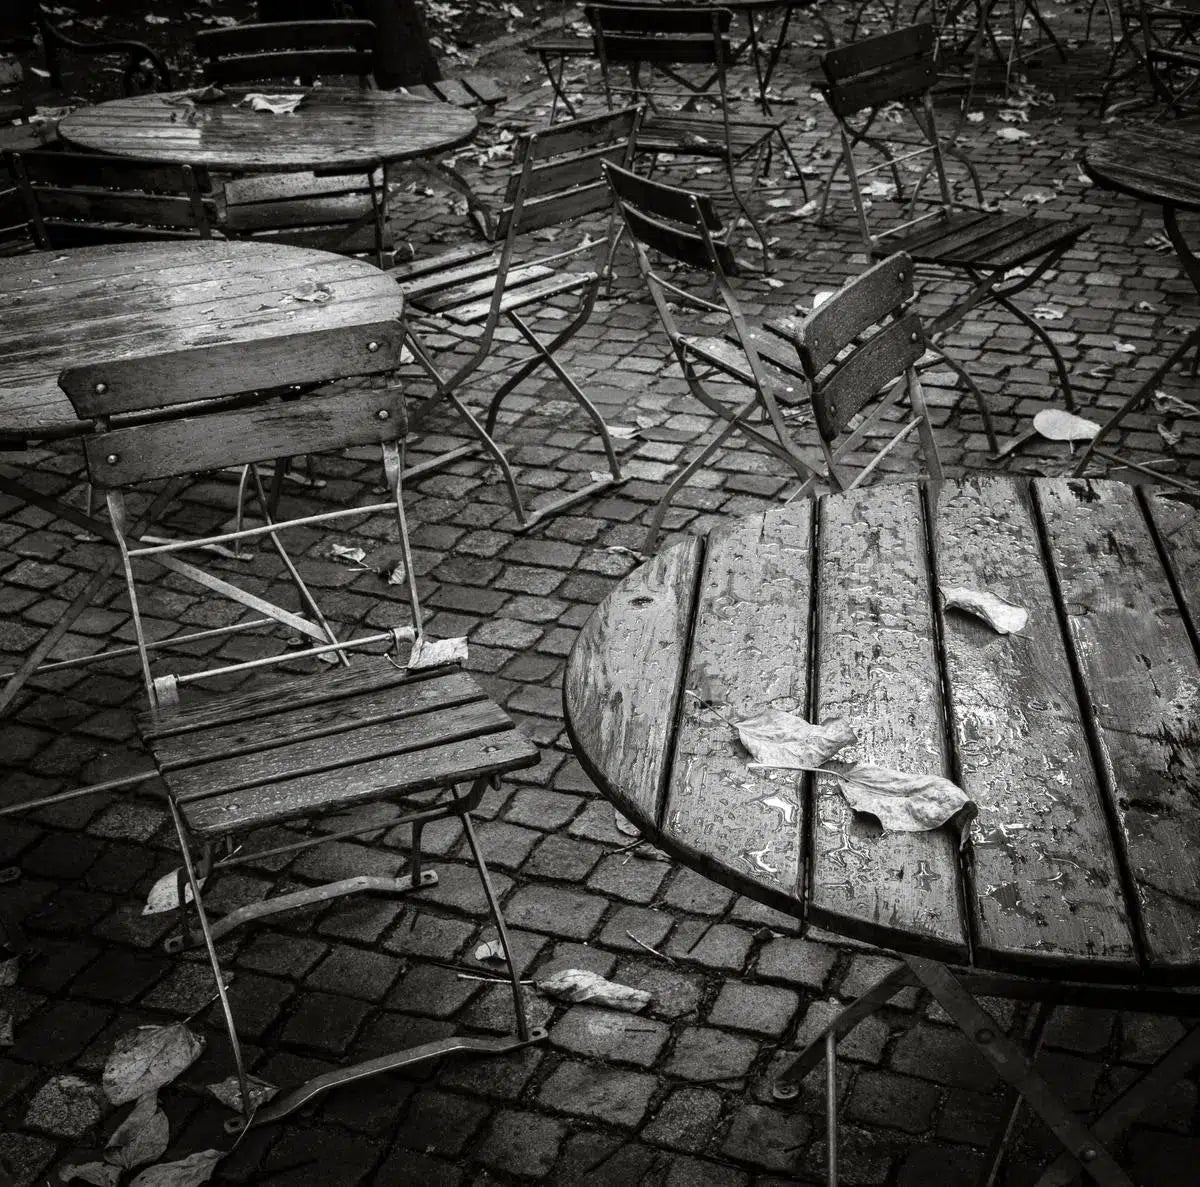 Tables and chairs, by Robert Canis-PurePhoto